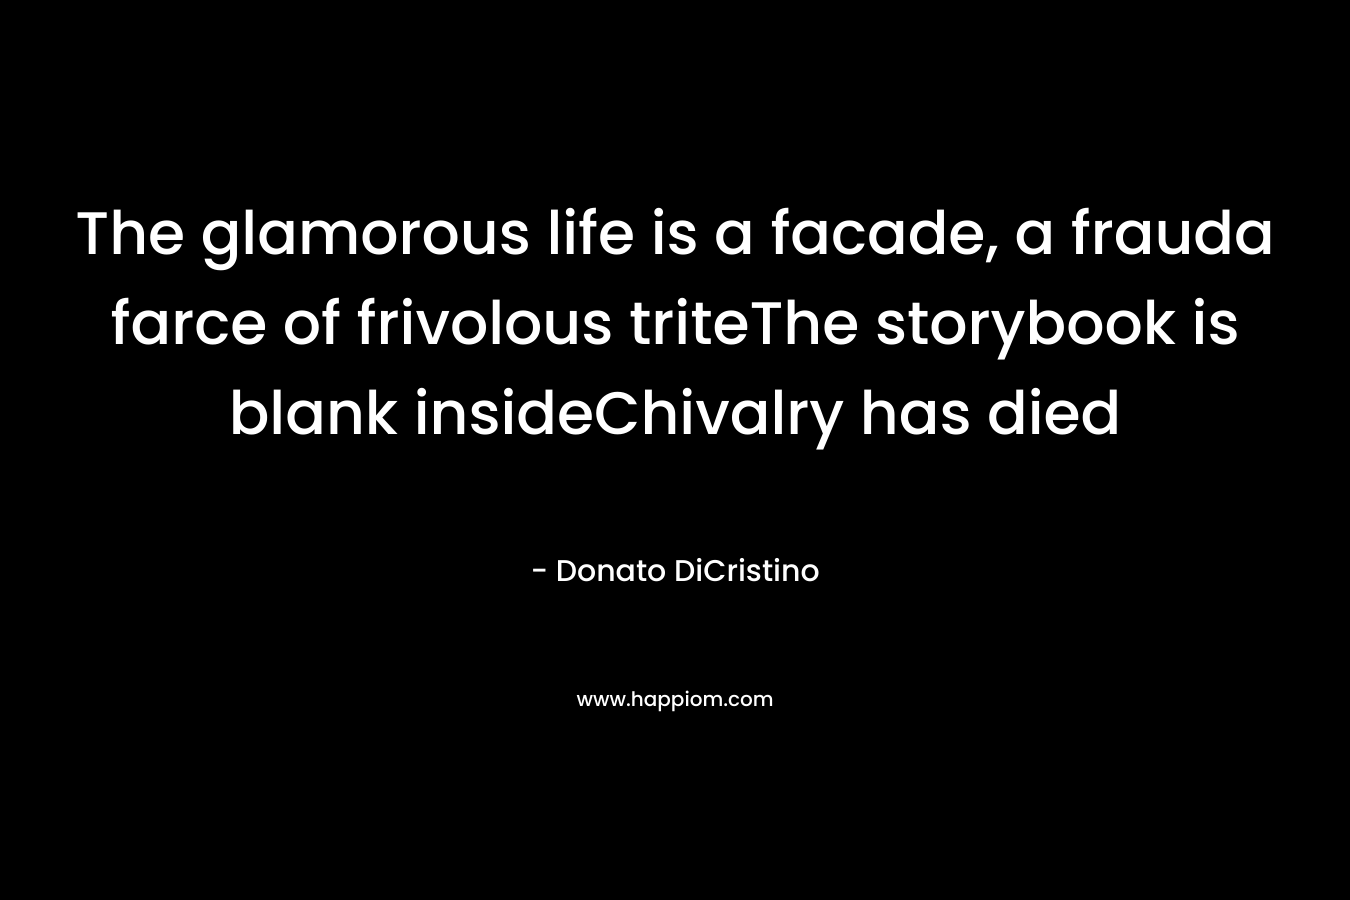 The glamorous life is a facade, a frauda farce of frivolous triteThe storybook is blank insideChivalry has died – Donato DiCristino